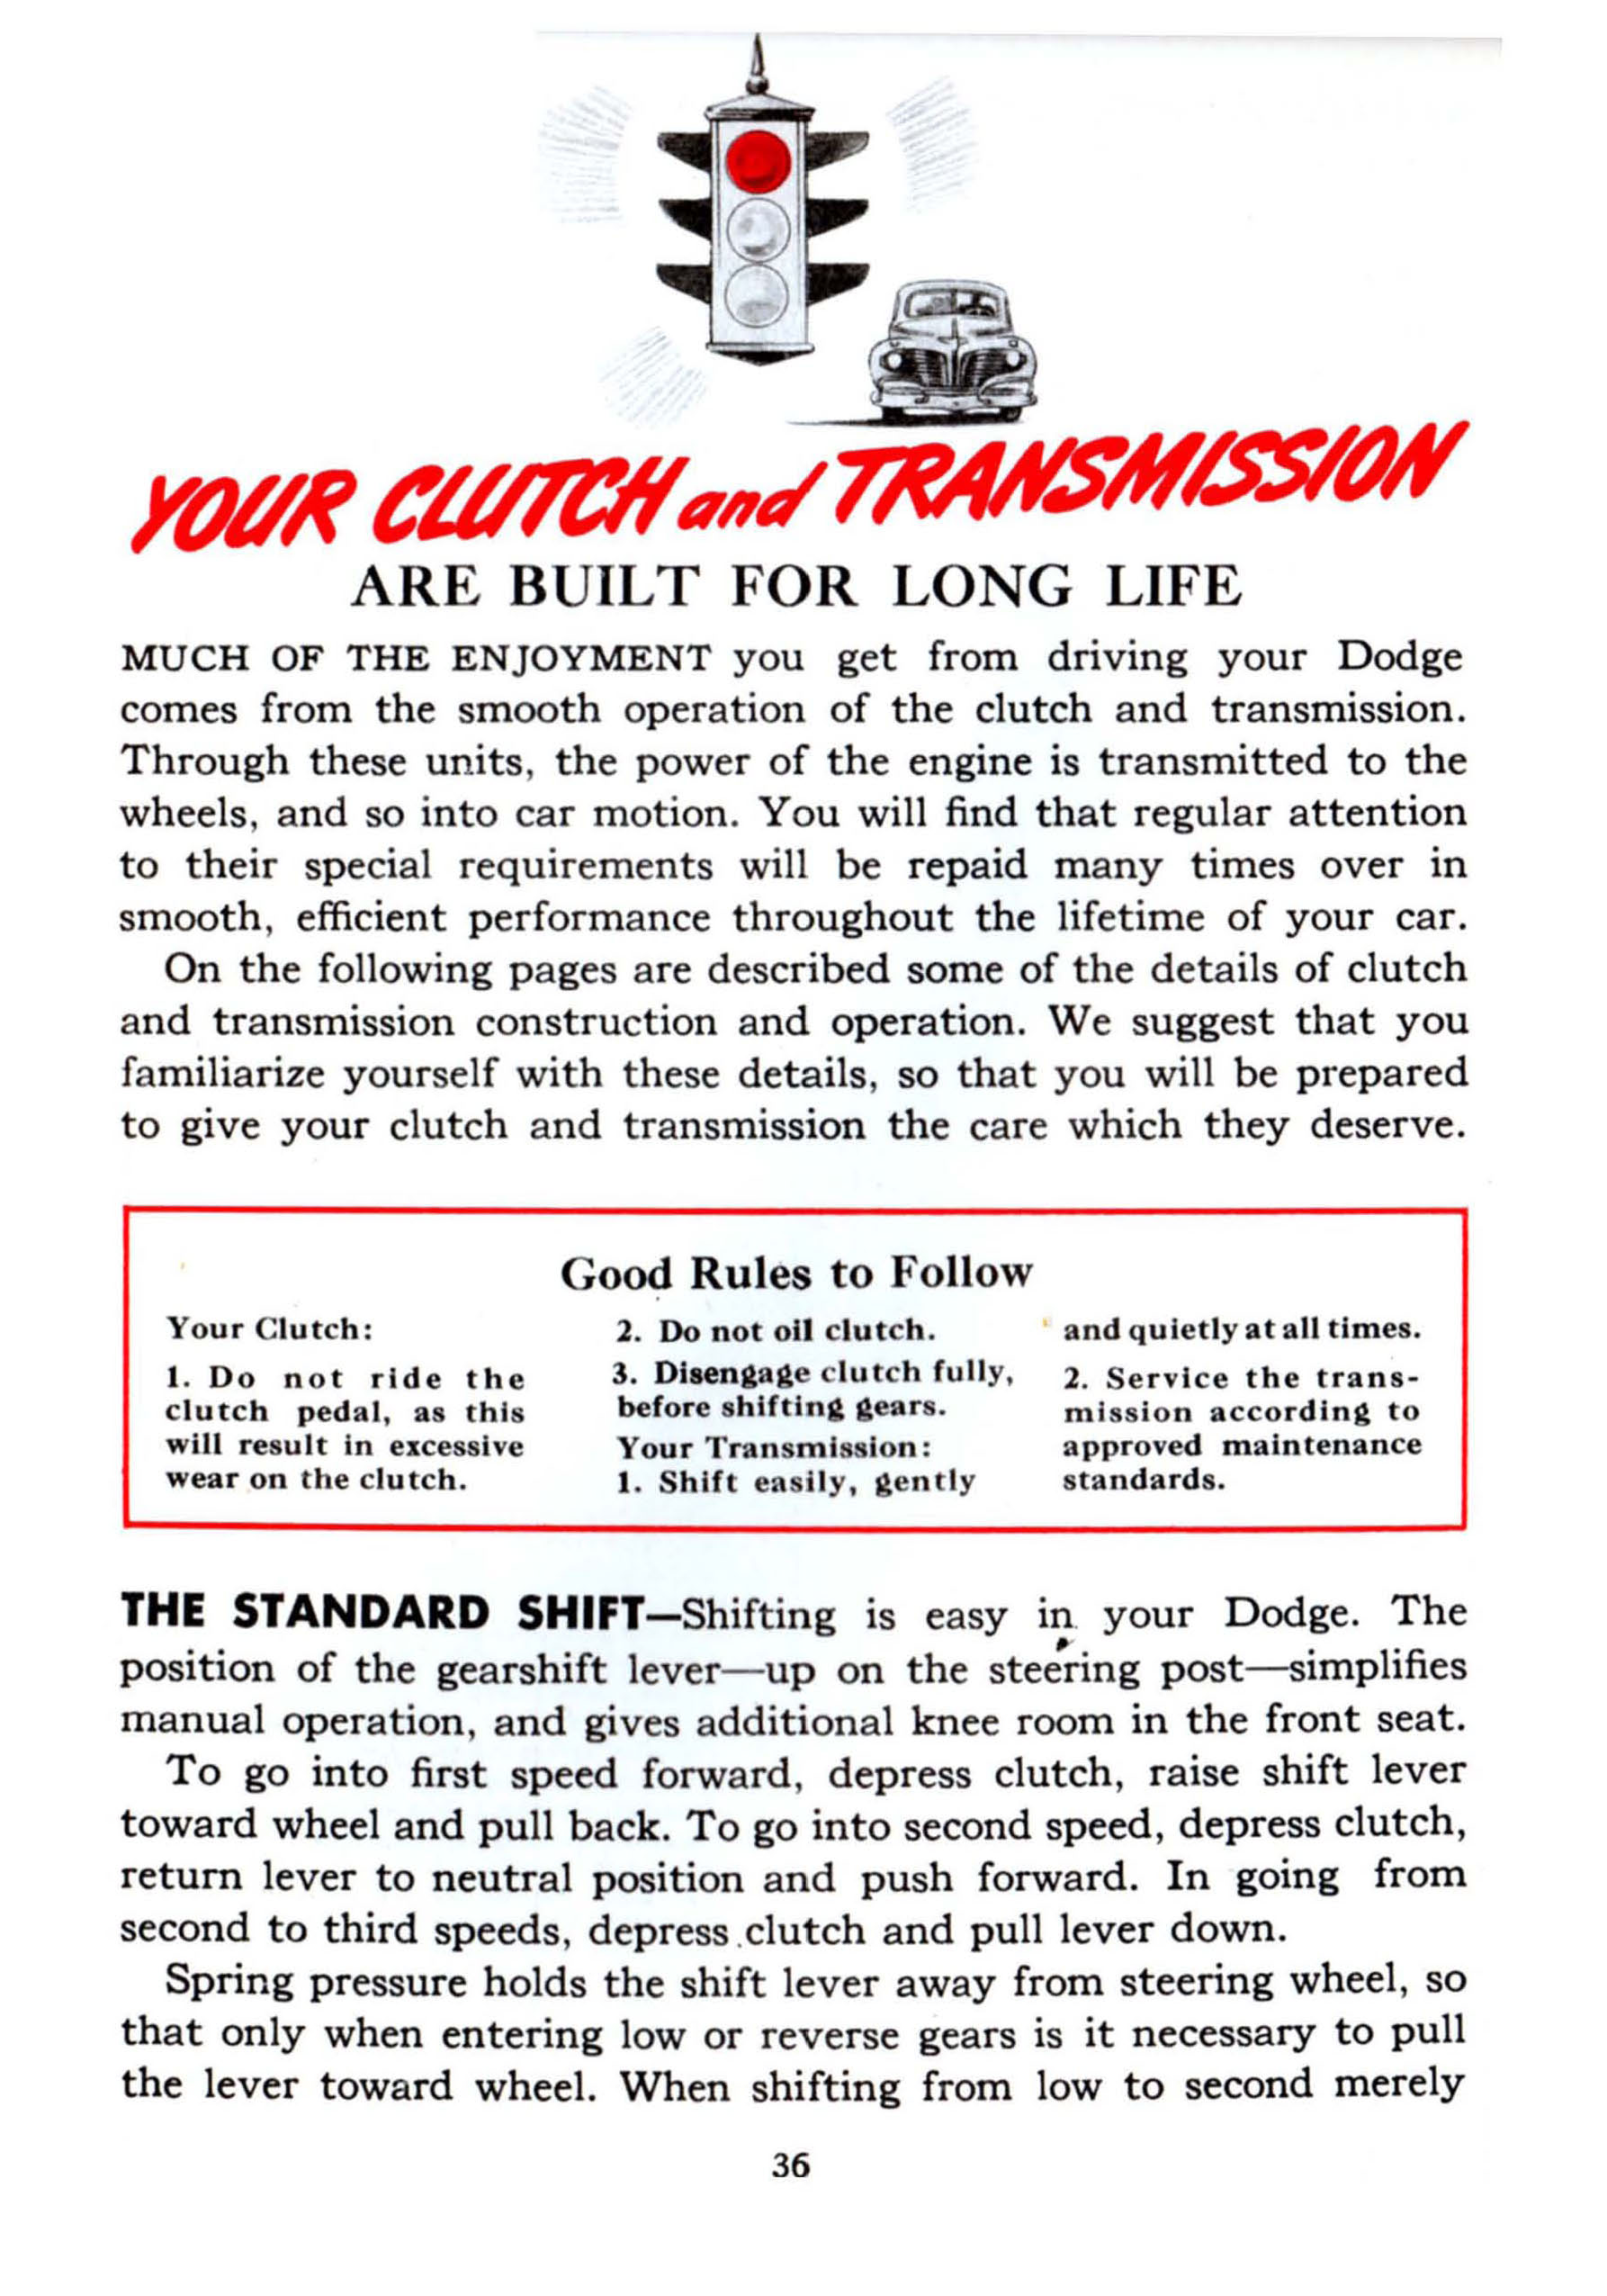 1941_Dodge_Owners_Manual-36